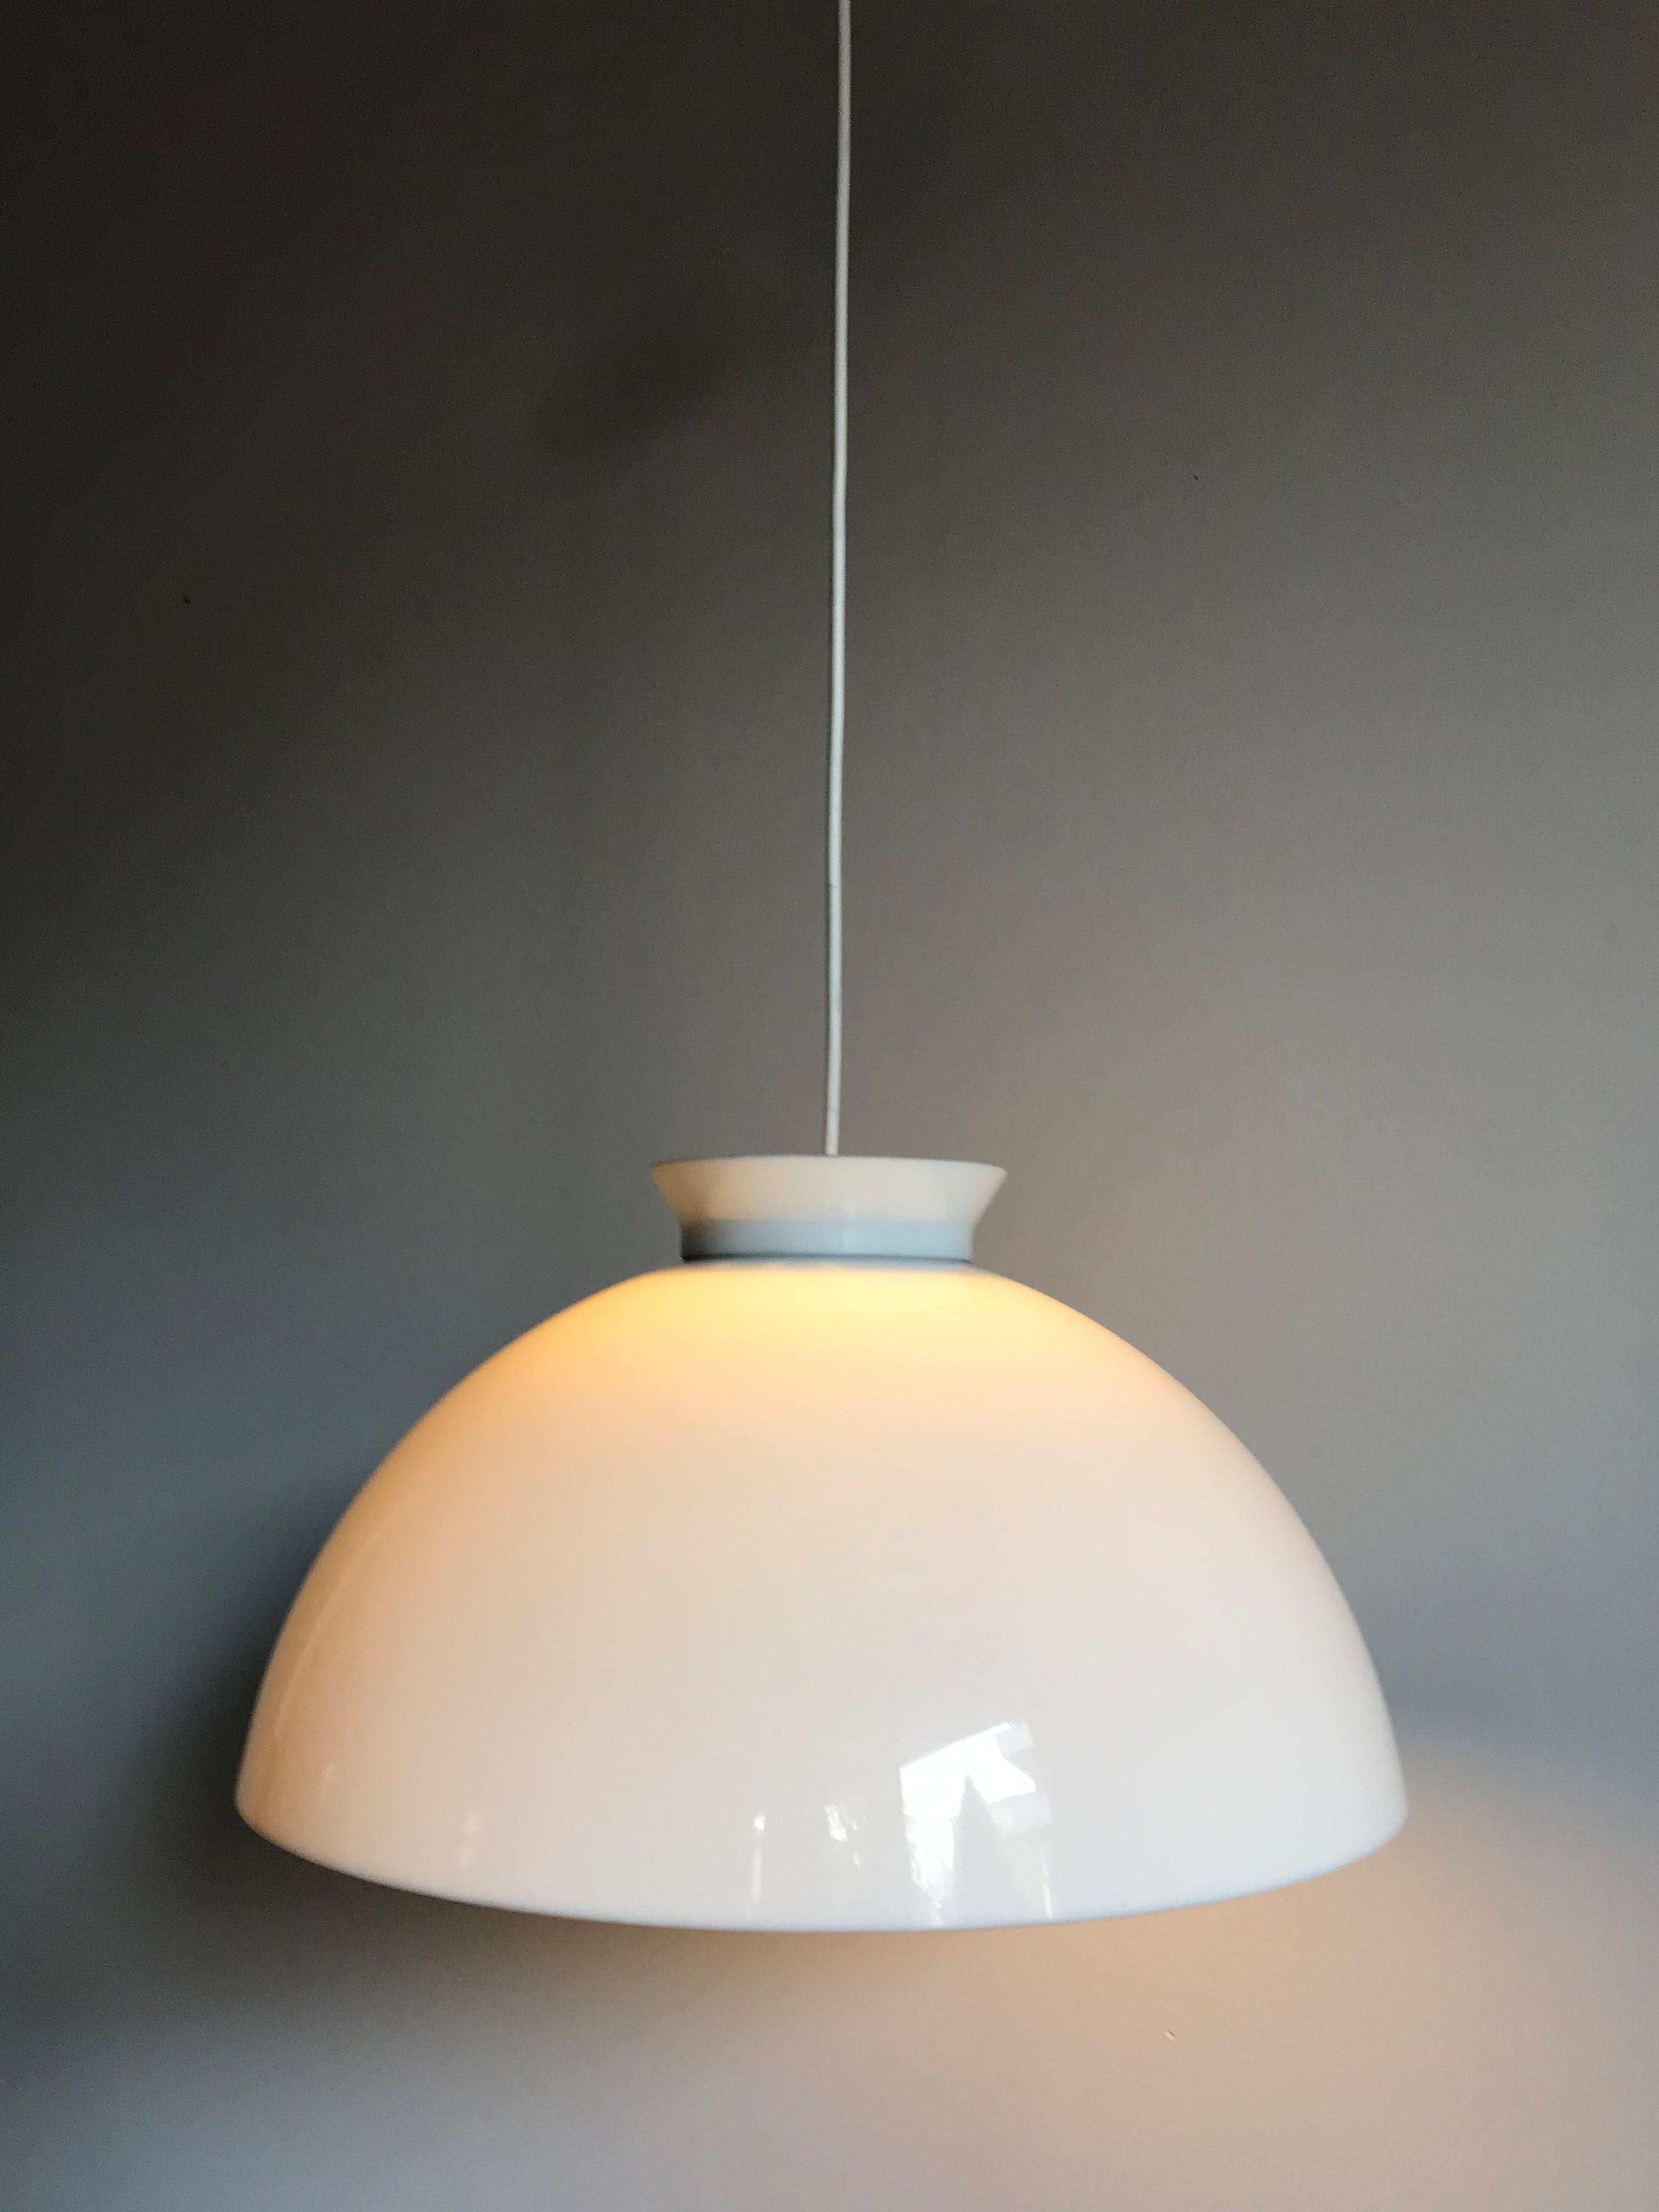 Italian pendant lamp model KD6 designed by famous designer Achille & Pier Giacomo Castiglioni for Kartell in 1959, opal methacrylate diffuser.

Please note that the lamp is original of the period and this shows normal signs of age and use.